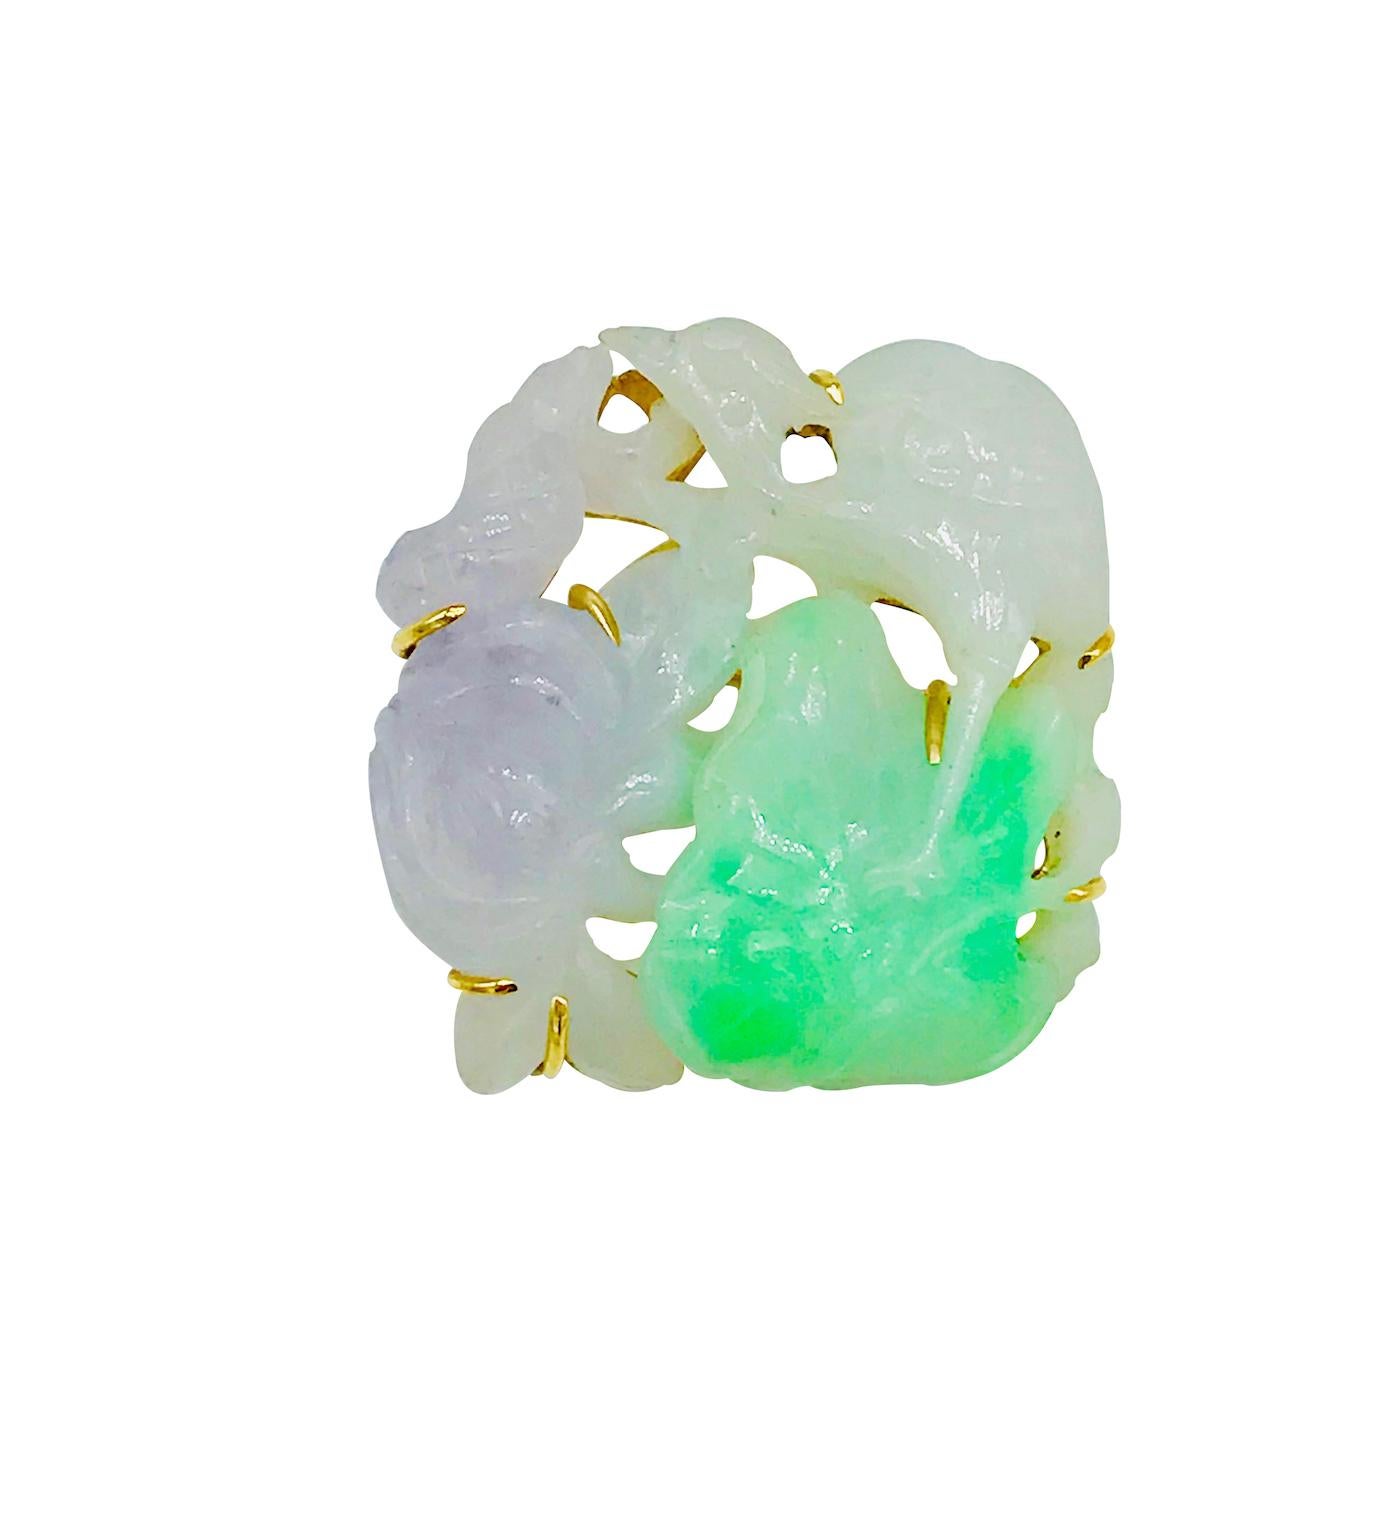 Chinese, Multi-Colored Jade, Turtles, Bird, Floral 14 Karat Pin In Good Condition For Sale In Aliso Viejo, CA